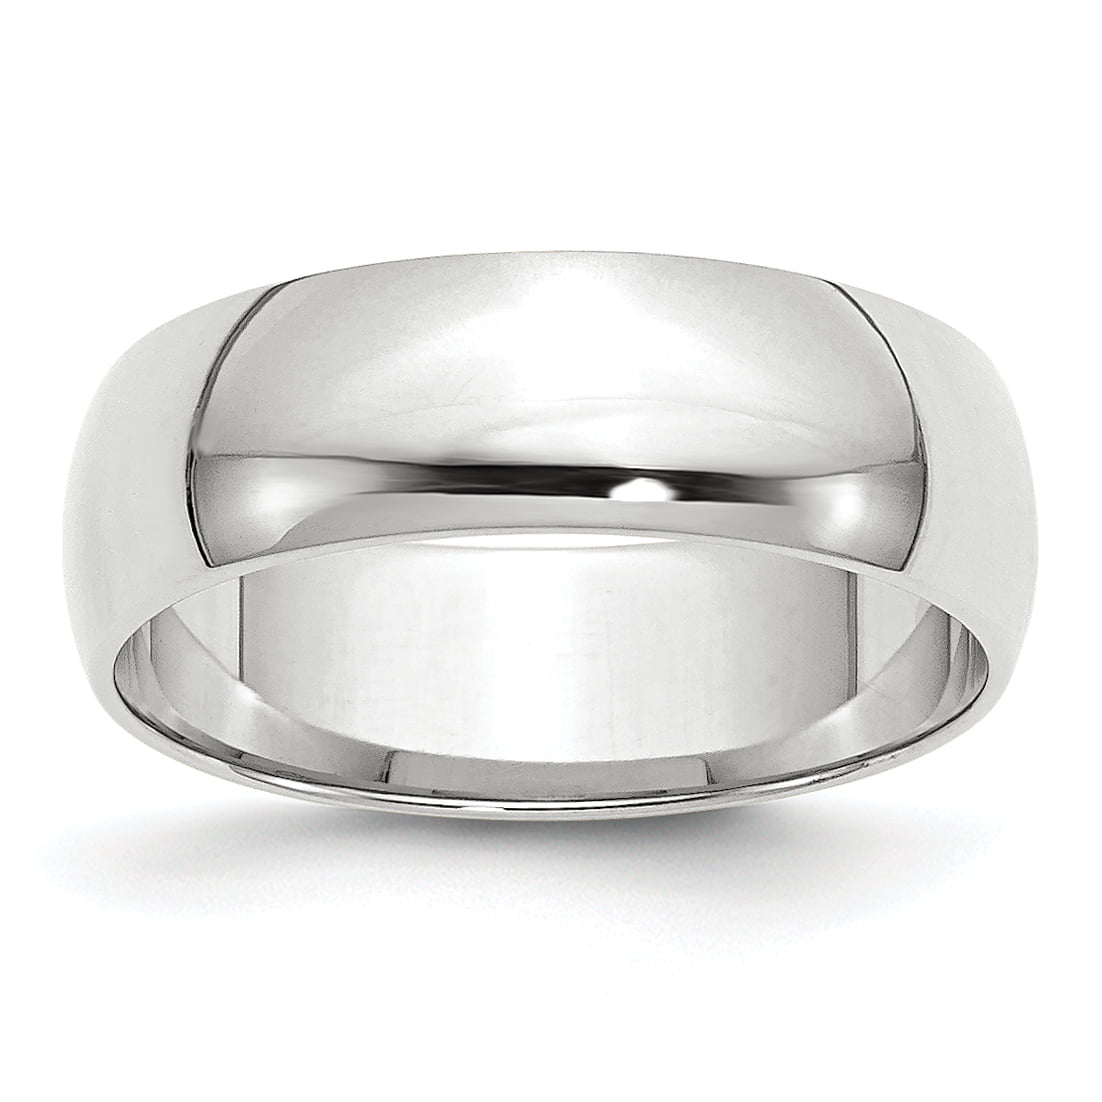 10K White Gold 6mm Light Weight Comfort Fit Band Ring Size 4 to 14 